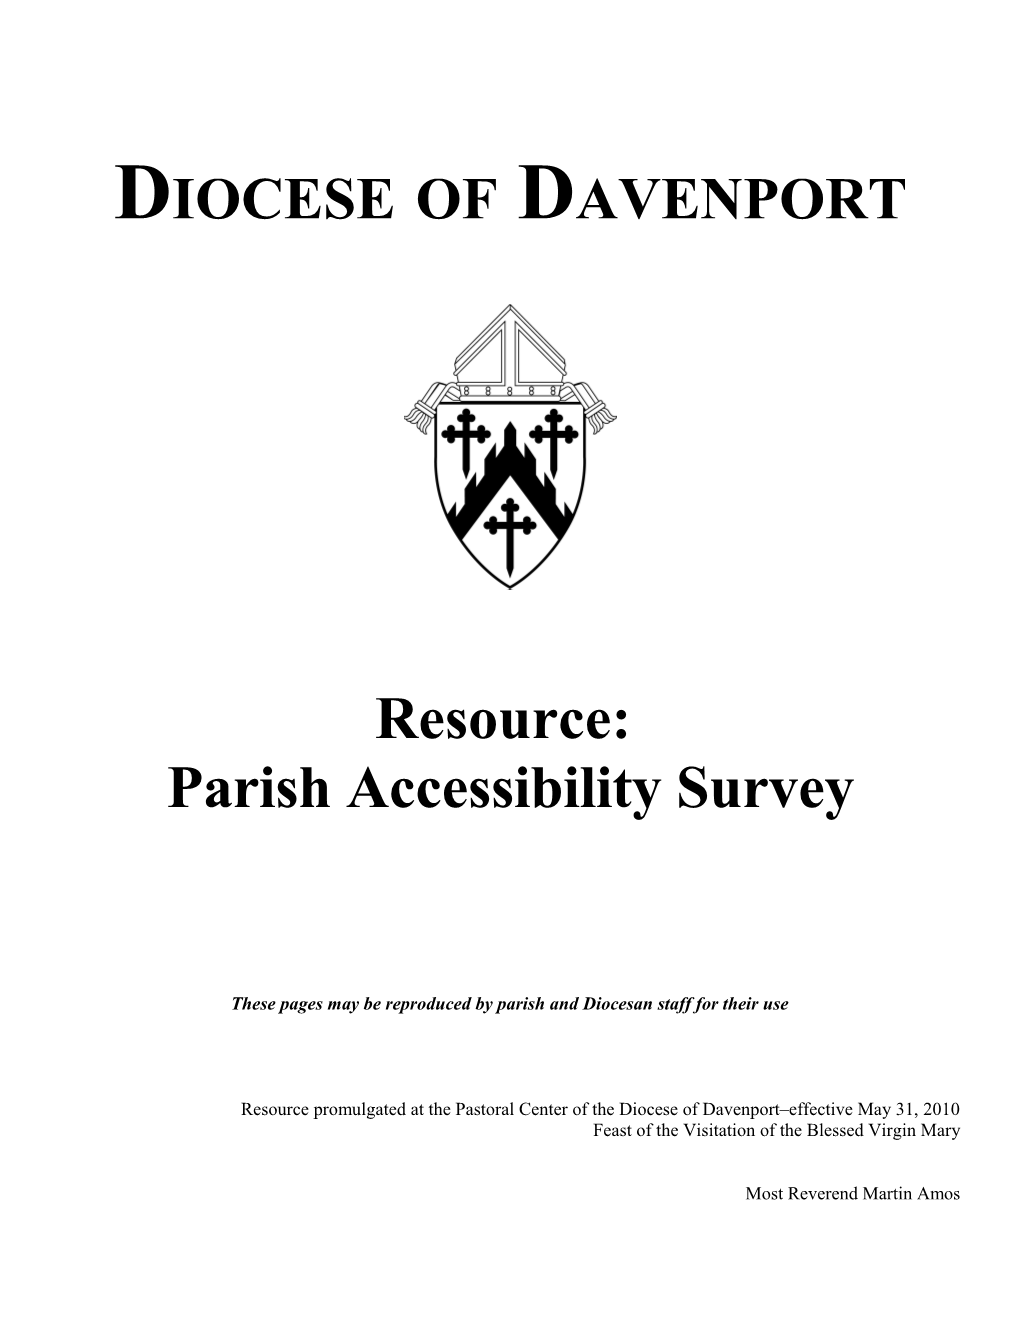 V-3100 All Are Welcome a Parish Accessibility Survey for the Diocese of Davenport